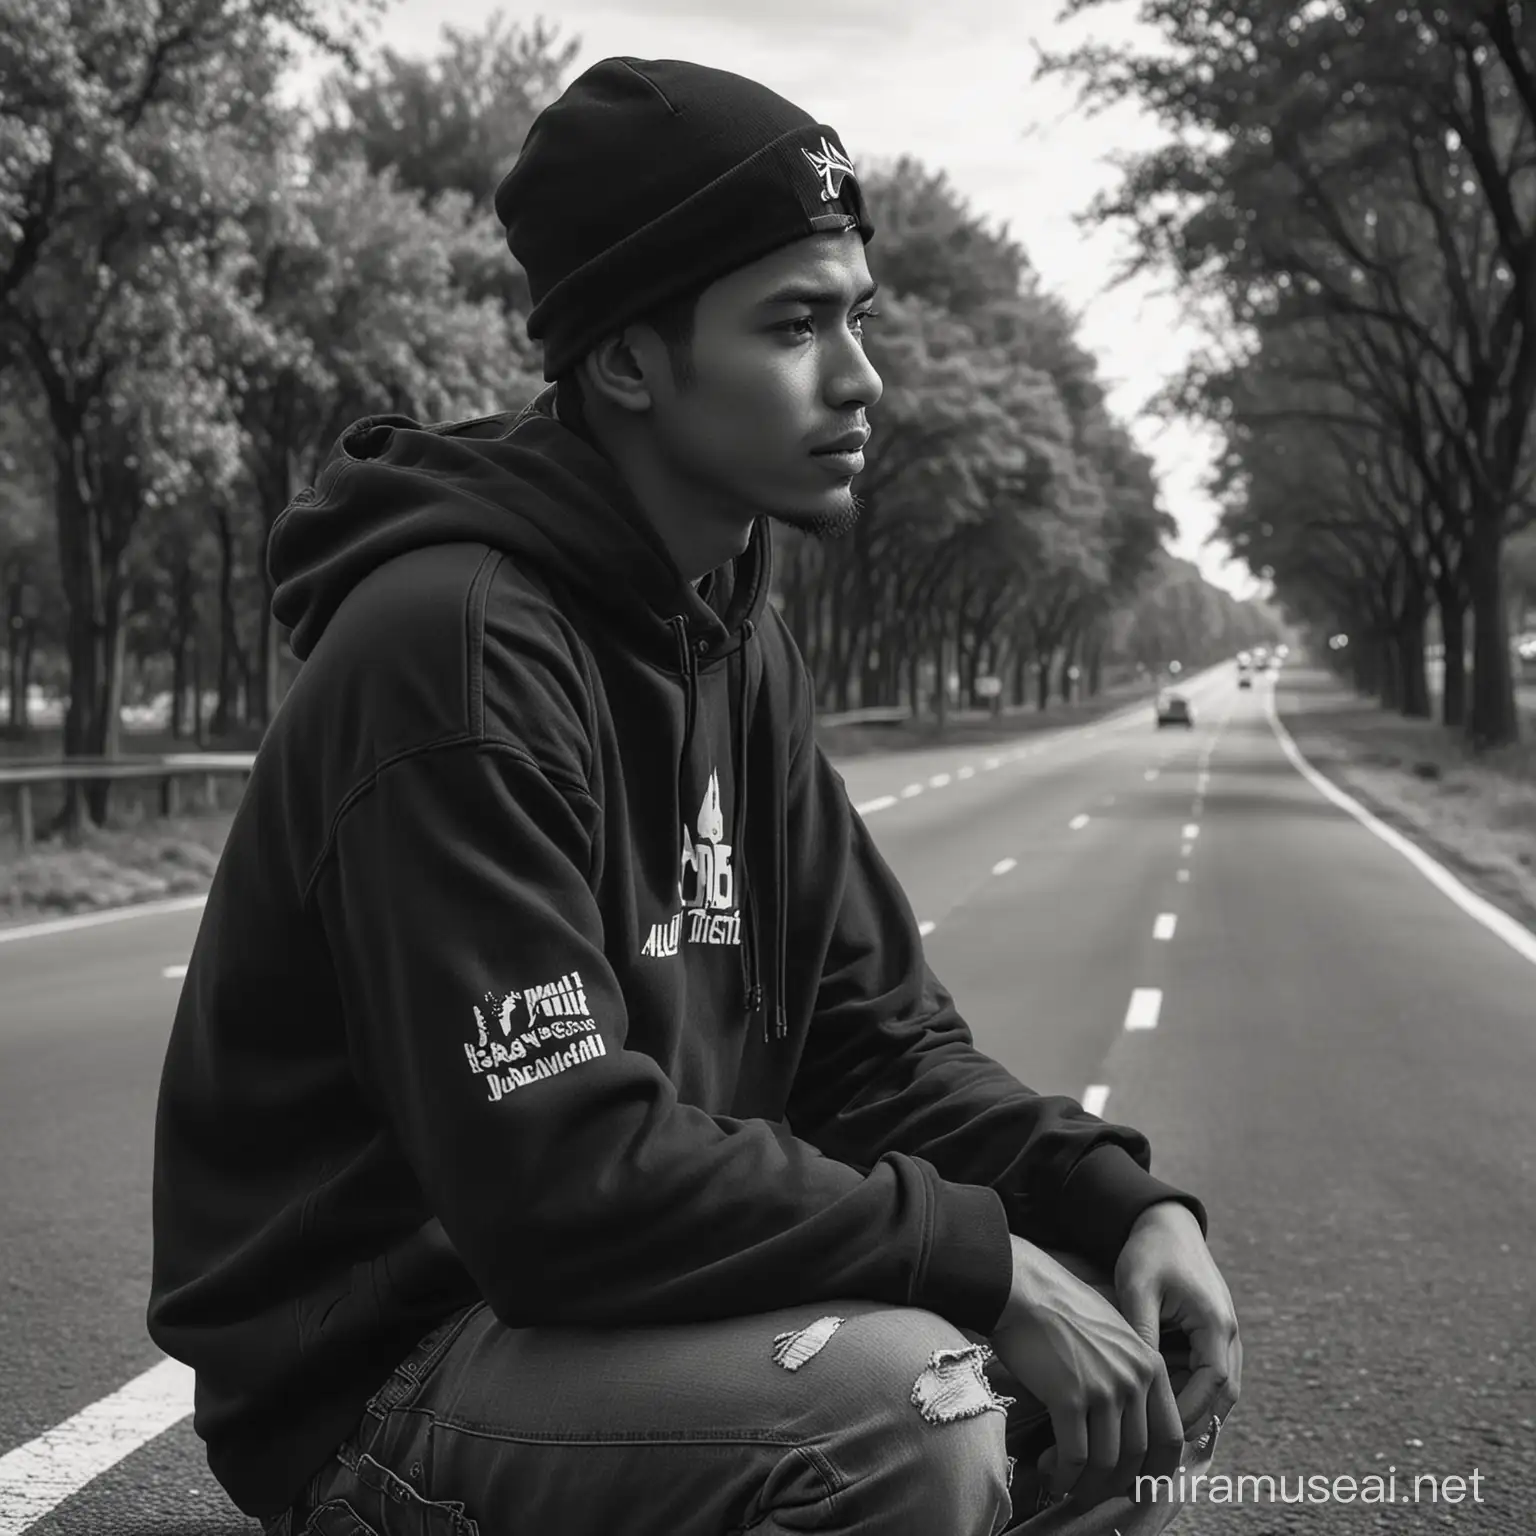 a young man from Java wearing a branded hat, fine facial details, wearing a black hoodie, jeans, black and white Jordan shoes, sitting in the middle of a quiet highway, facial expression languid, visible on the left and right are trees, the weather is clear, realistic ,FHD,8K